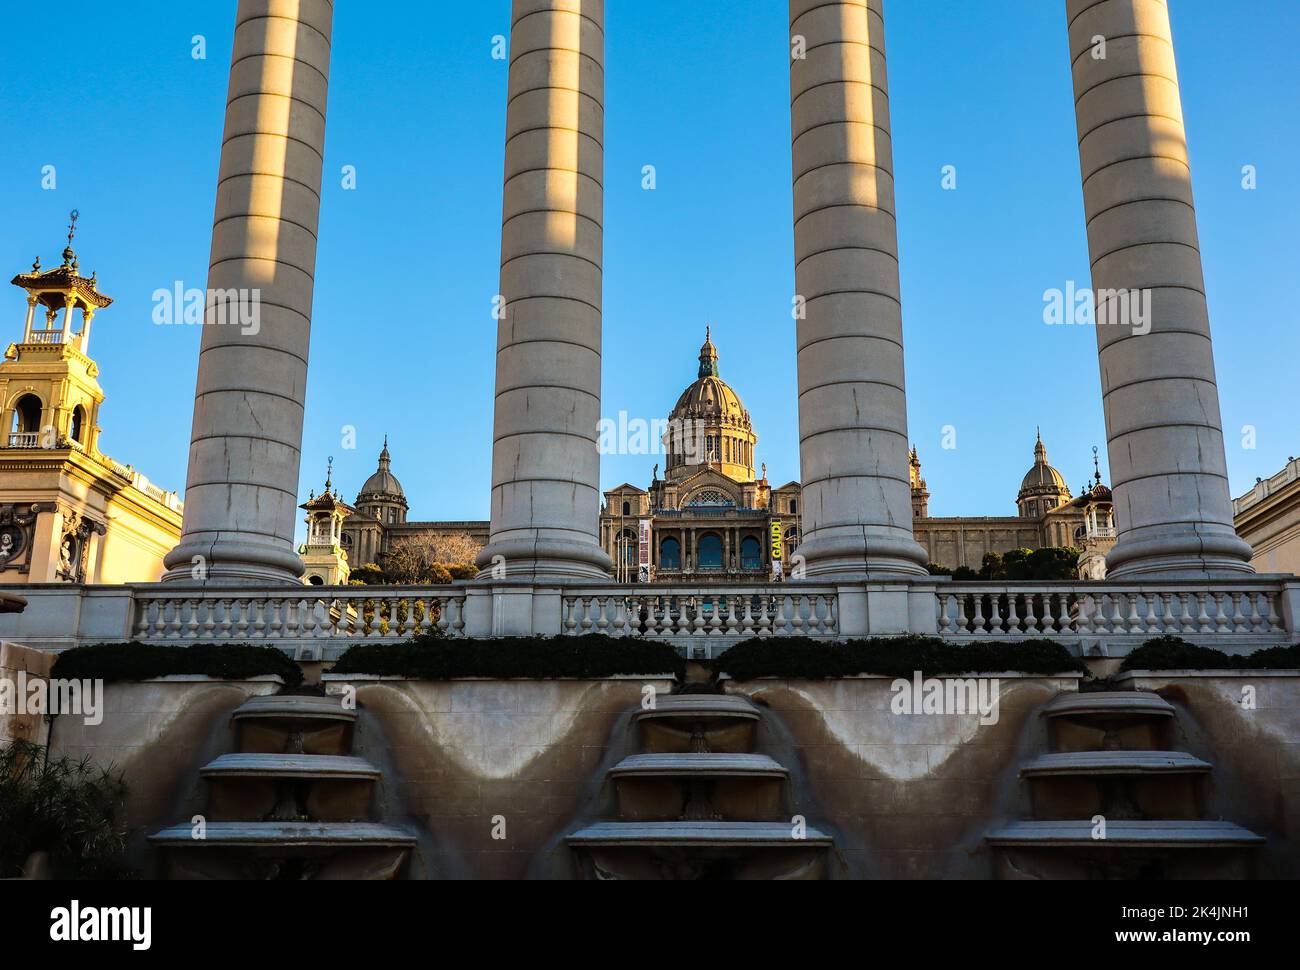 Barcelona, Spain - February 11, 2022: Palau Nacional between Four Columns is a National Art Museum in Catalonia. Stock Photo